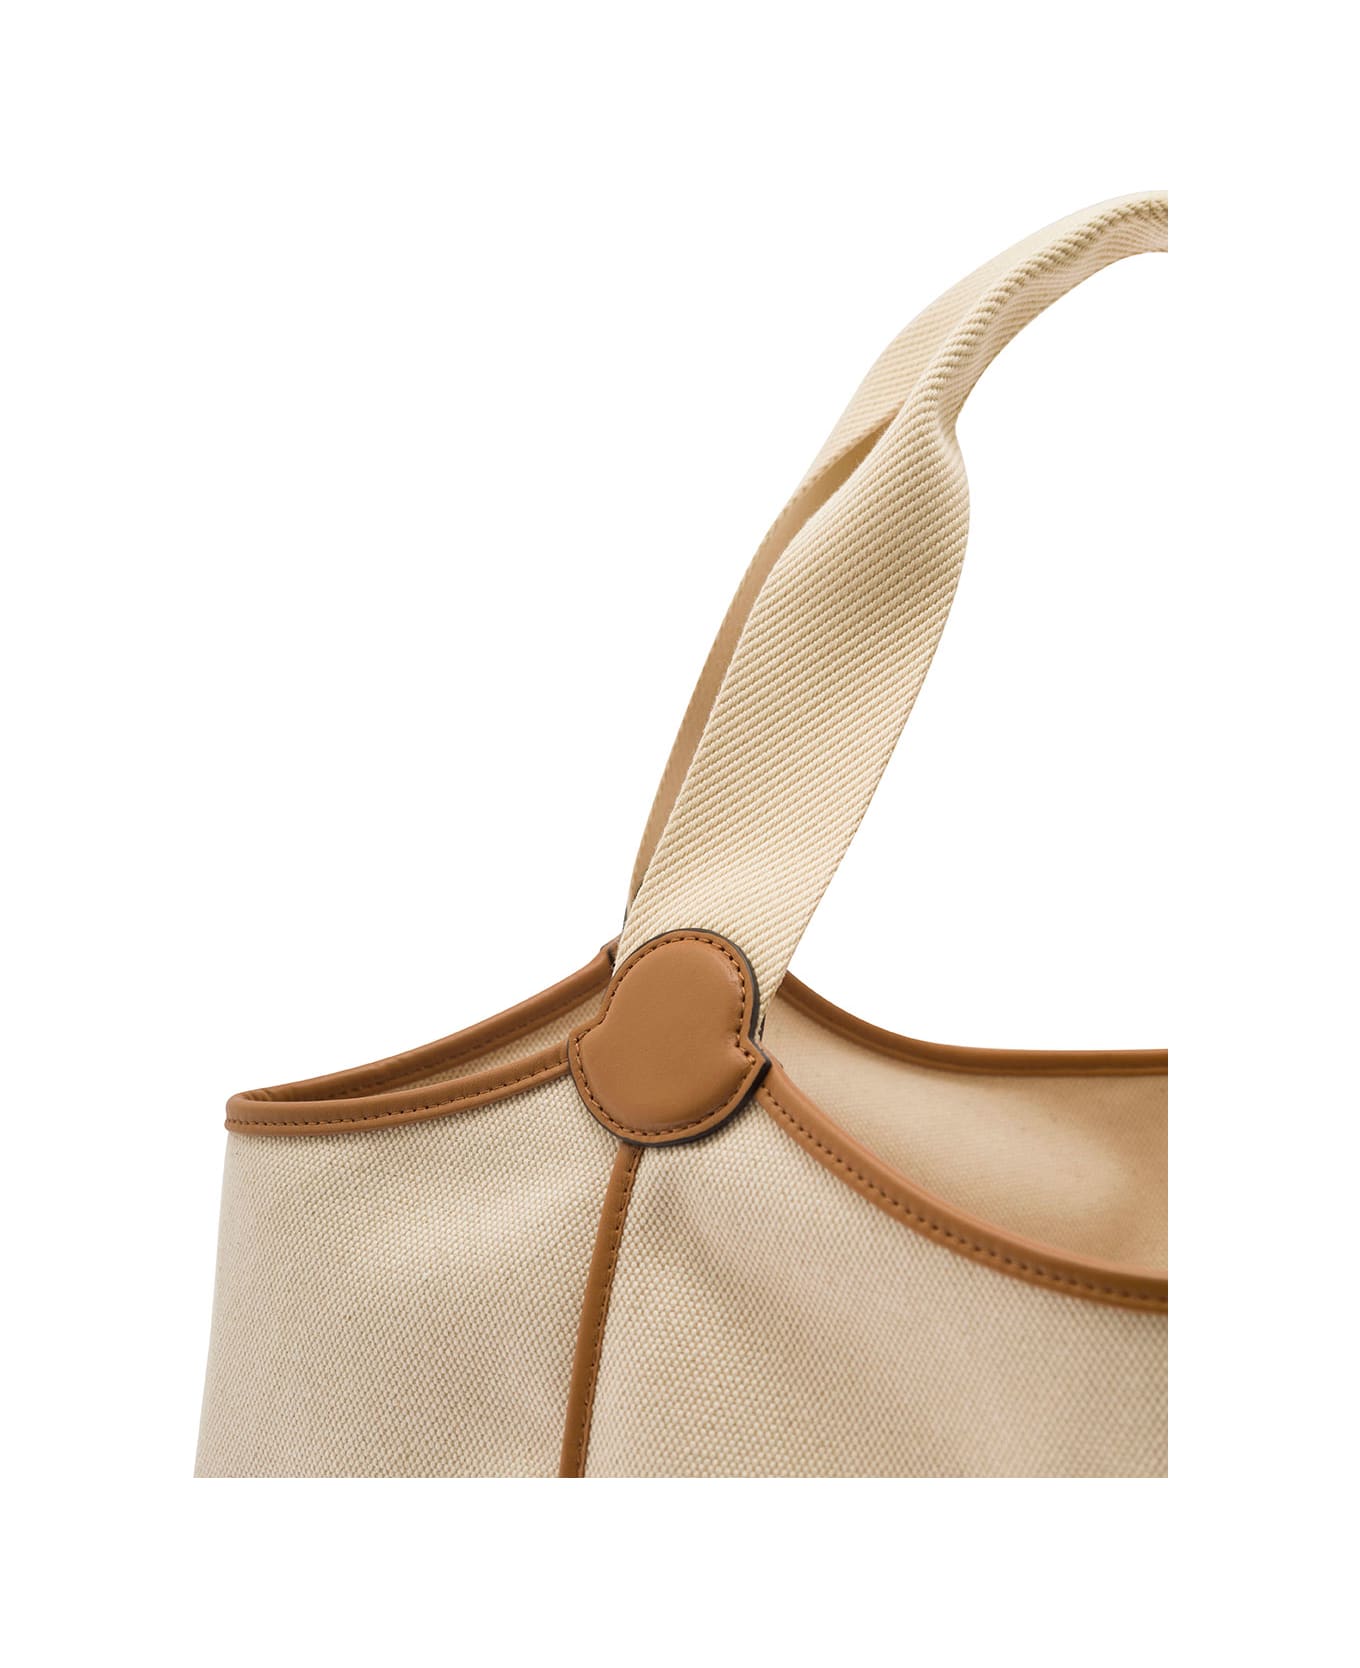 Moncler Nalani Tote Bag In Beige Canvas Woman - Beige